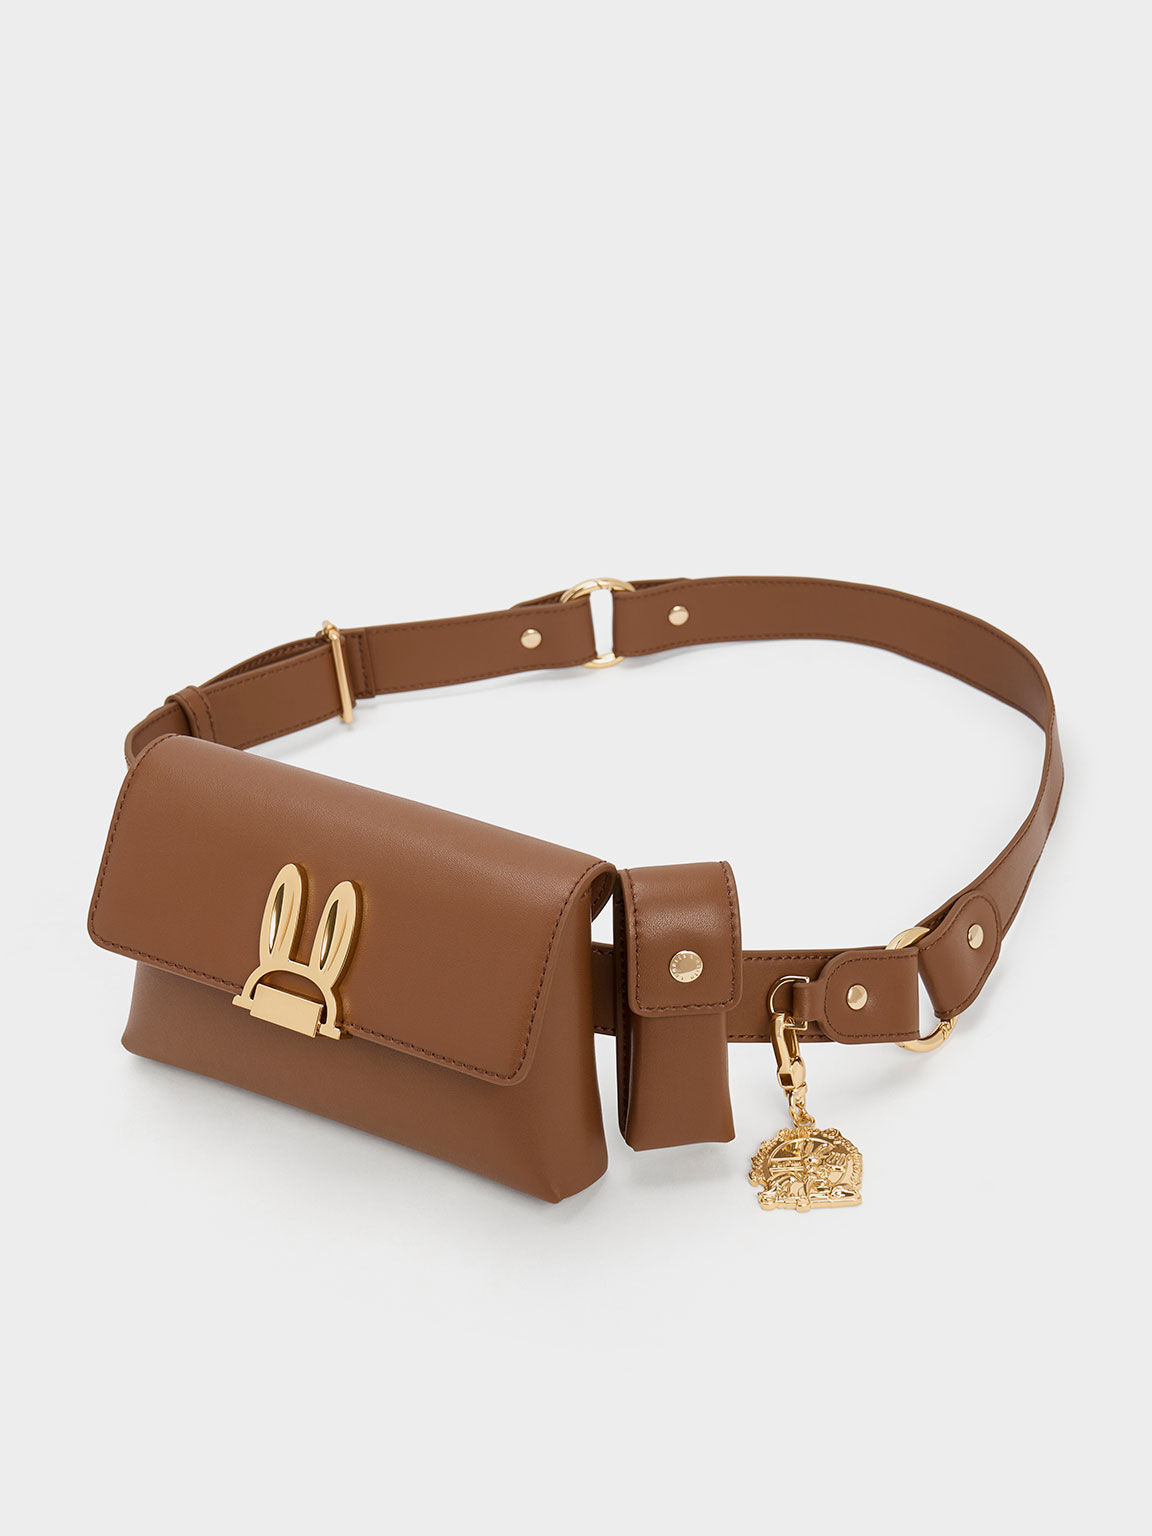 Judy Hopps Belted Pouch, Brown, hi-res